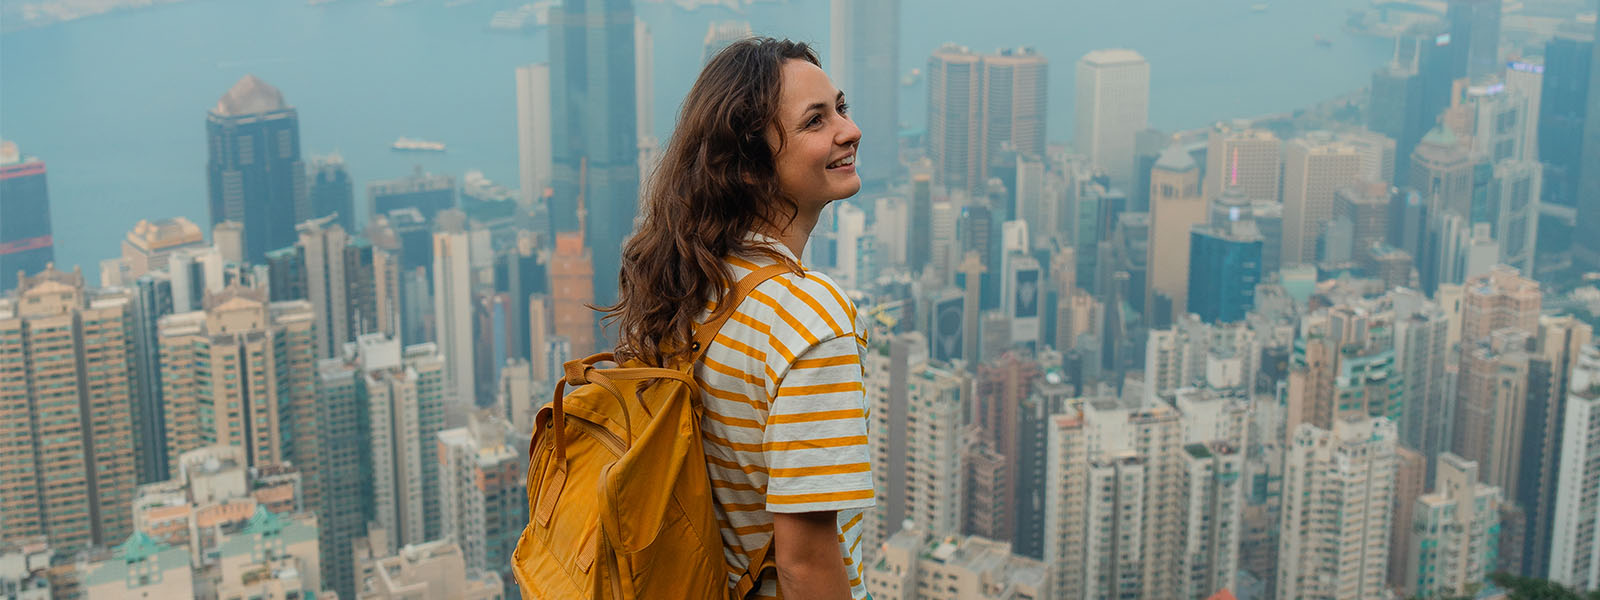 Smiling student with cityscape in background.